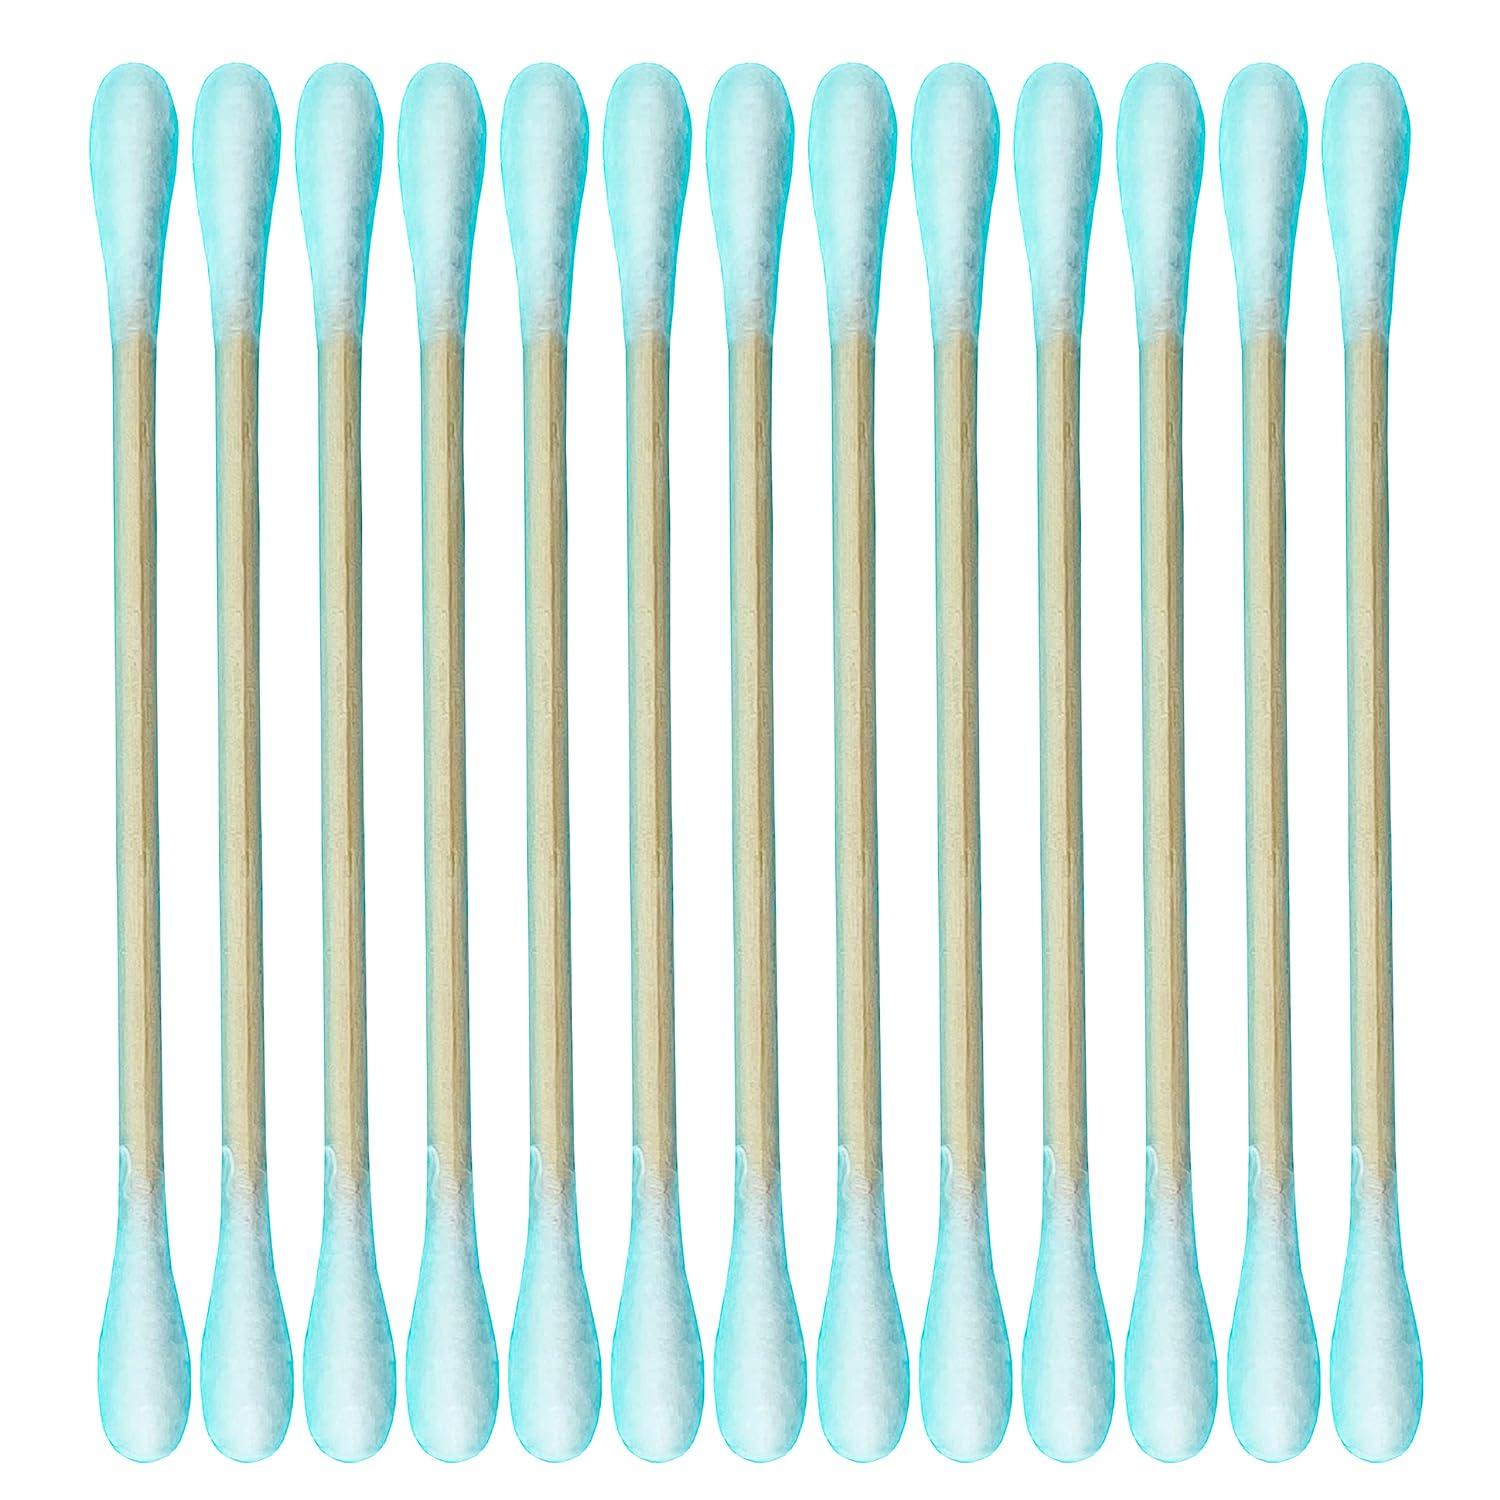  400pcs CGR Organic cotton Swabs, 100% Cotton Double-Tipped,  White Paper Sticks(compostable), Travel Pack(8 Pack of 50 Swabs Total) :  Beauty & Personal Care